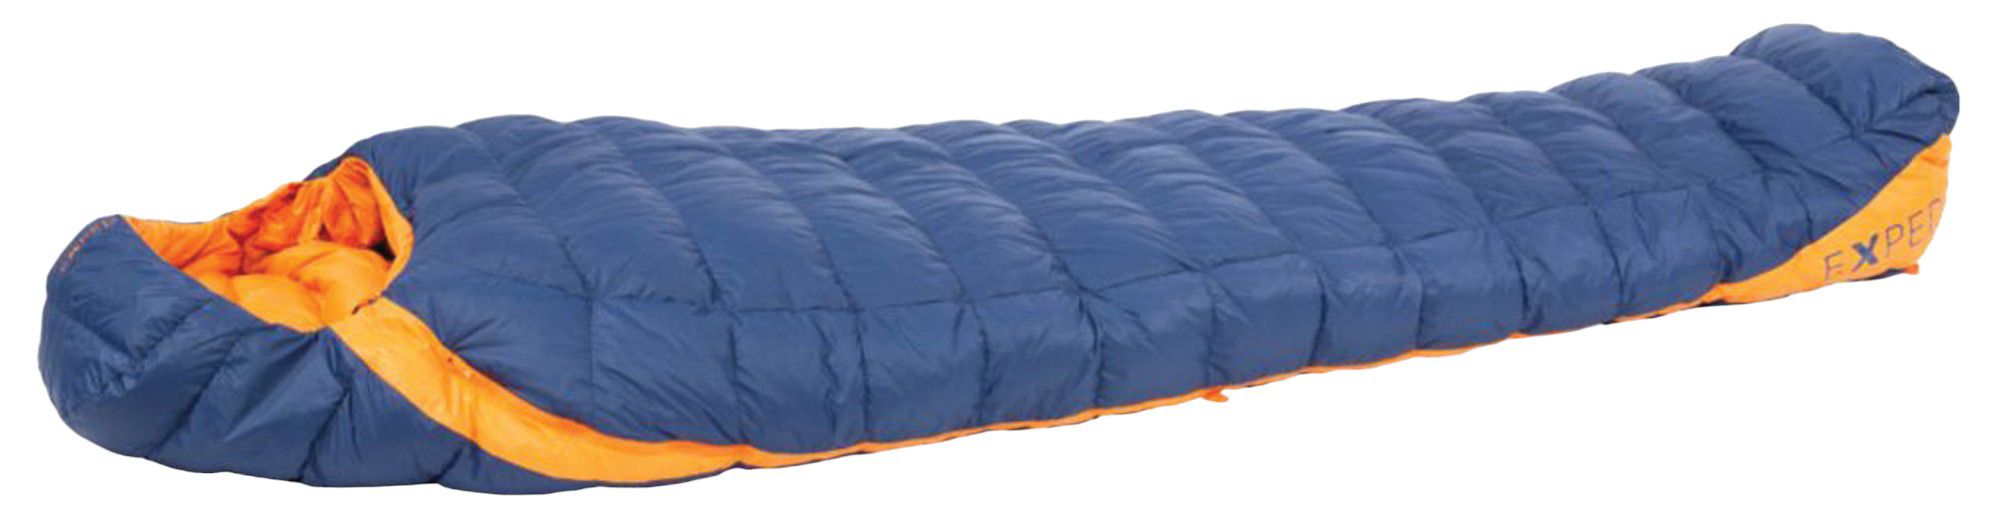 Photos - Outdoor Furniture Exped Comfort 0C/32F Sleeping Bag, Men's | Father's Day Gift Idea 23RSAACM 